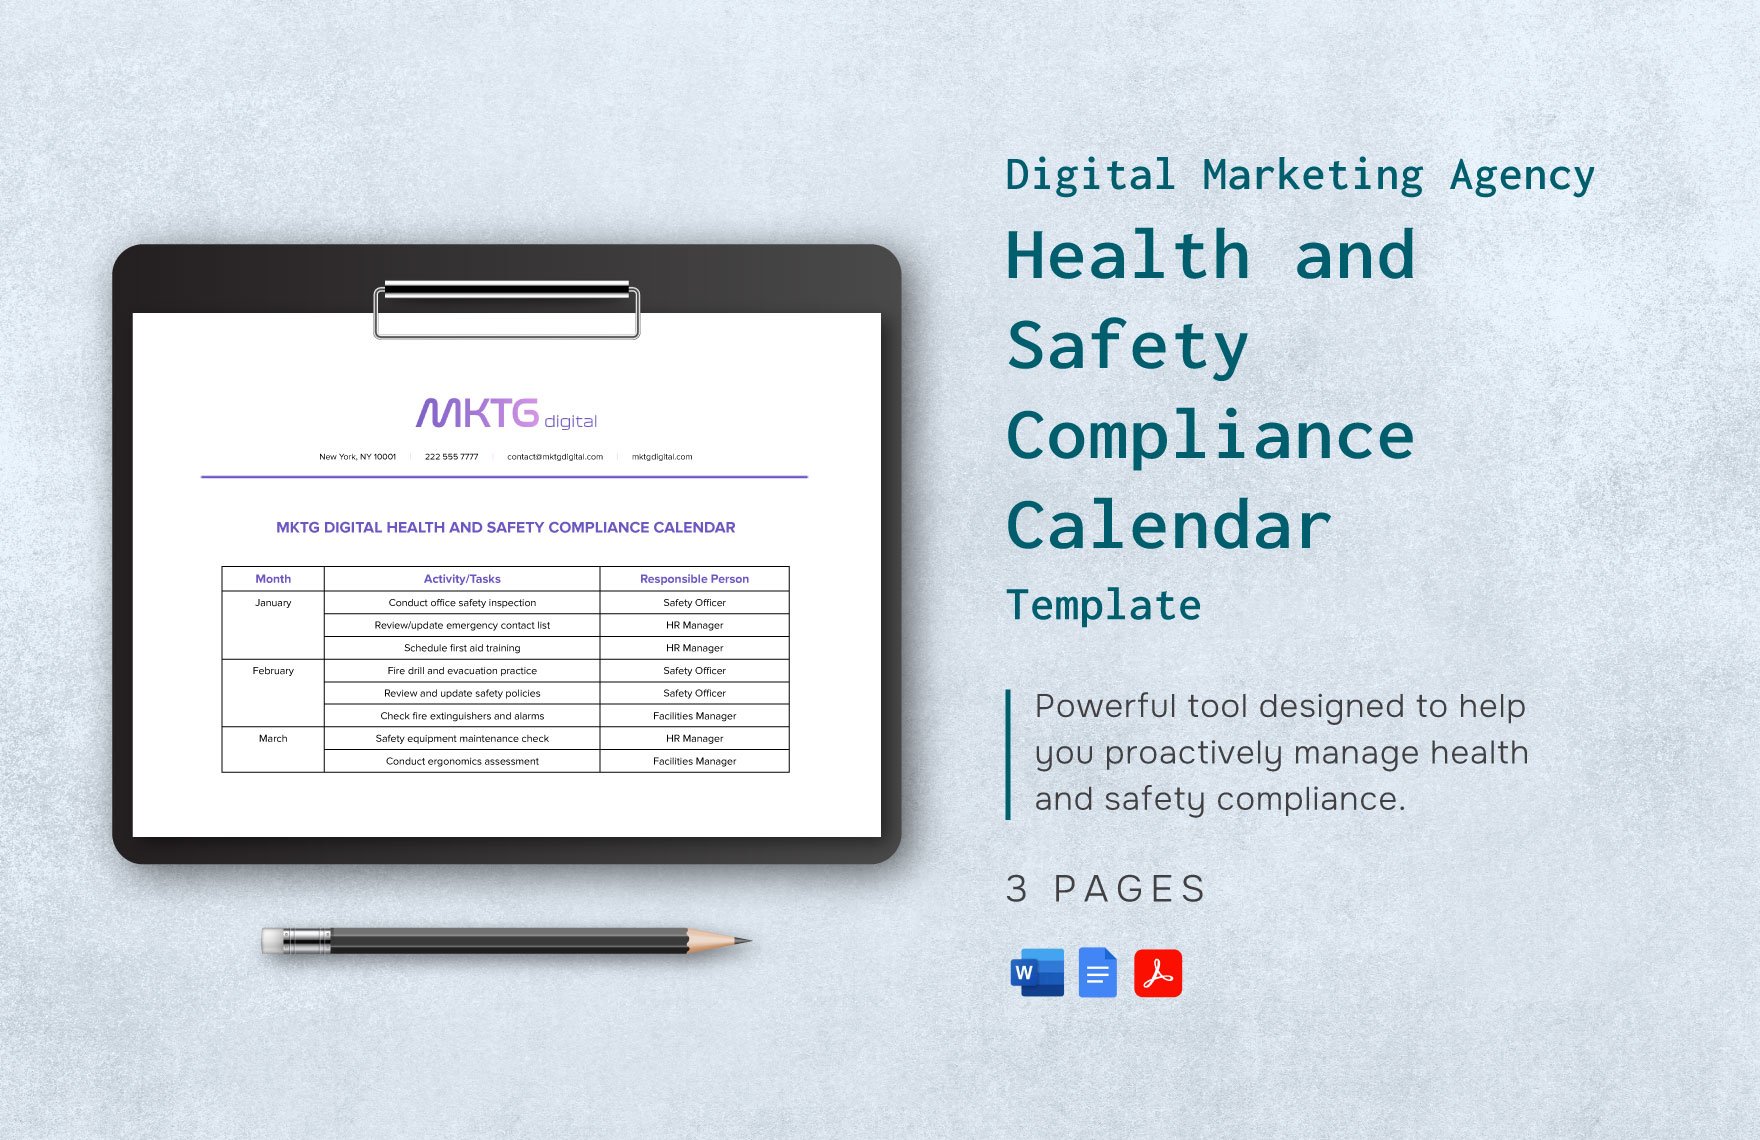 Digital Marketing Agency Health and Safety Compliance Calendar Template